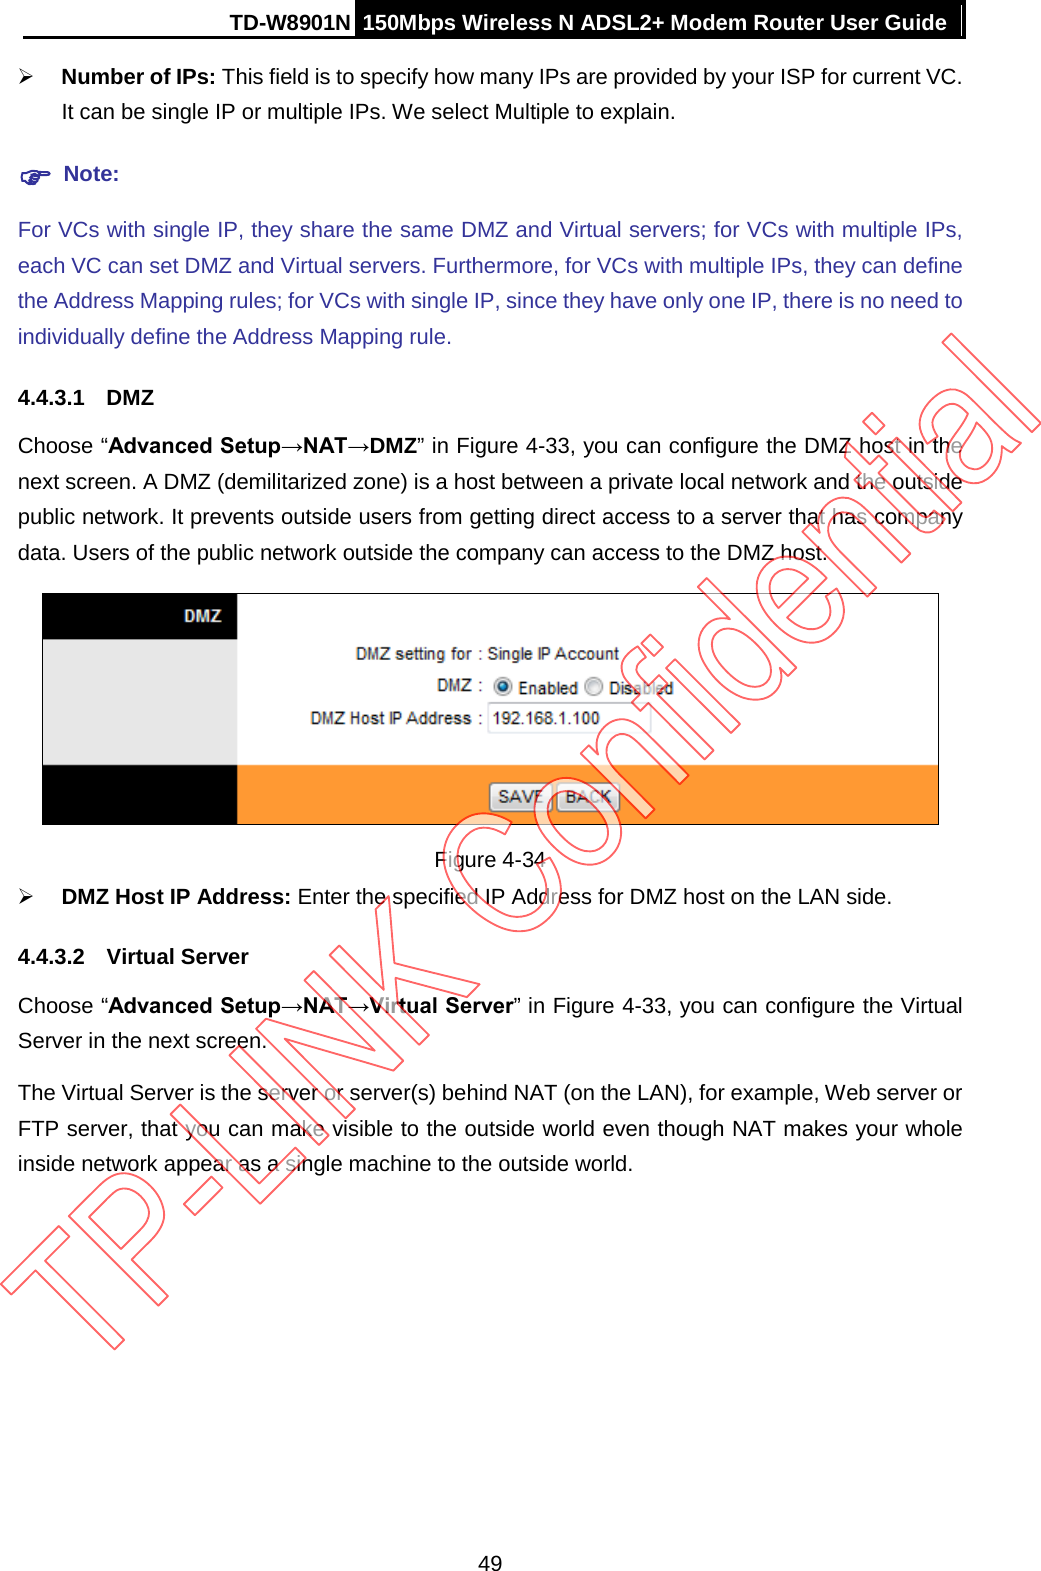 TD-W8901N 150Mbps Wireless N ADSL2+ Modem Router User Guide   Number of IPs: This field is to specify how many IPs are provided by your ISP for current VC. It can be single IP or multiple IPs. We select Multiple to explain.  Note: For VCs with single IP, they share the same DMZ and Virtual servers; for VCs with multiple IPs, each VC can set DMZ and Virtual servers. Furthermore, for VCs with multiple IPs, they can define the Address Mapping rules; for VCs with single IP, since they have only one IP, there is no need to individually define the Address Mapping rule. 4.4.3.1 DMZ Choose “Advanced Setup→NAT→DMZ” in Figure 4-33, you can configure the DMZ host in the next screen. A DMZ (demilitarized zone) is a host between a private local network and the outside public network. It prevents outside users from getting direct access to a server that has company data. Users of the public network outside the company can access to the DMZ host.  Figure 4-34  DMZ Host IP Address: Enter the specified IP Address for DMZ host on the LAN side. 4.4.3.2 Virtual Server Choose “Advanced Setup→NAT→Virtual Server” in Figure 4-33, you can configure the Virtual Server in the next screen.   The Virtual Server is the server or server(s) behind NAT (on the LAN), for example, Web server or FTP server, that you can make visible to the outside world even though NAT makes your whole inside network appear as a single machine to the outside world. 49 